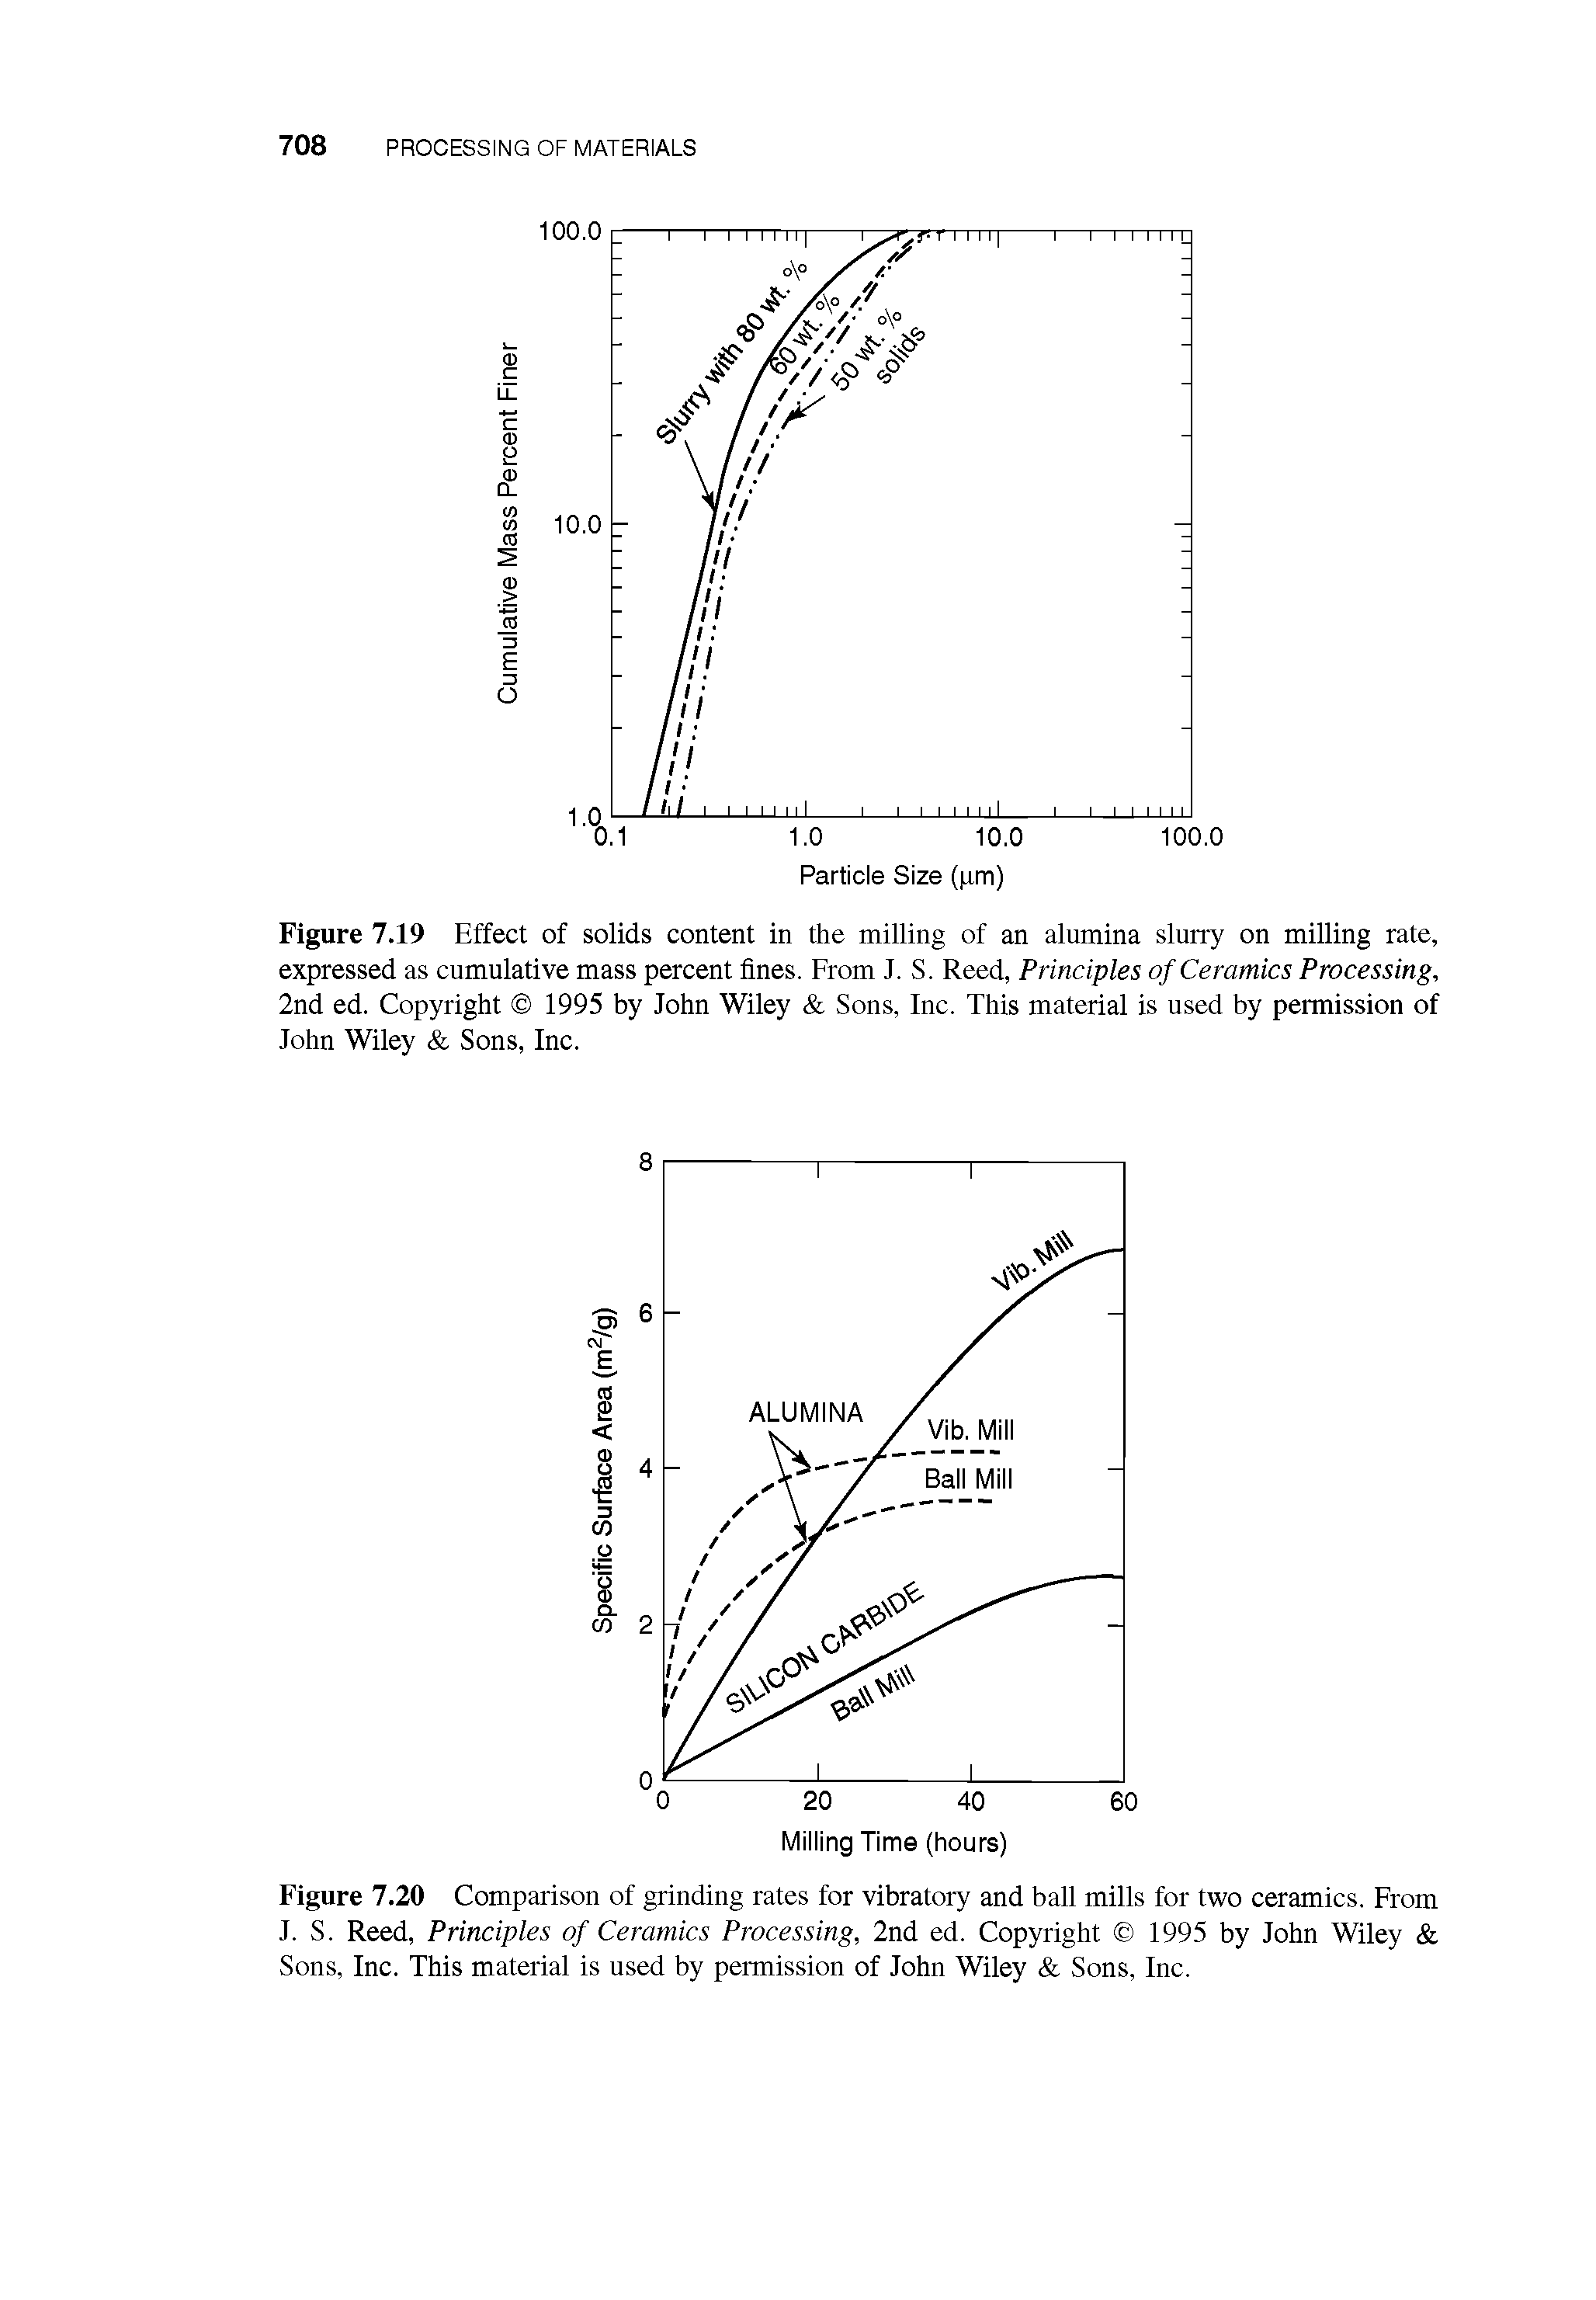 Figure 7.20 Comparison of grinding rates for vibratory and ball mills for two ceramics. From J. S. Reed, Principles of Ceramics Processing, 2nd ed. Copyright 1995 by John Wiley Sons, Inc. This material is used by permission of John Wiley Sons, Inc.